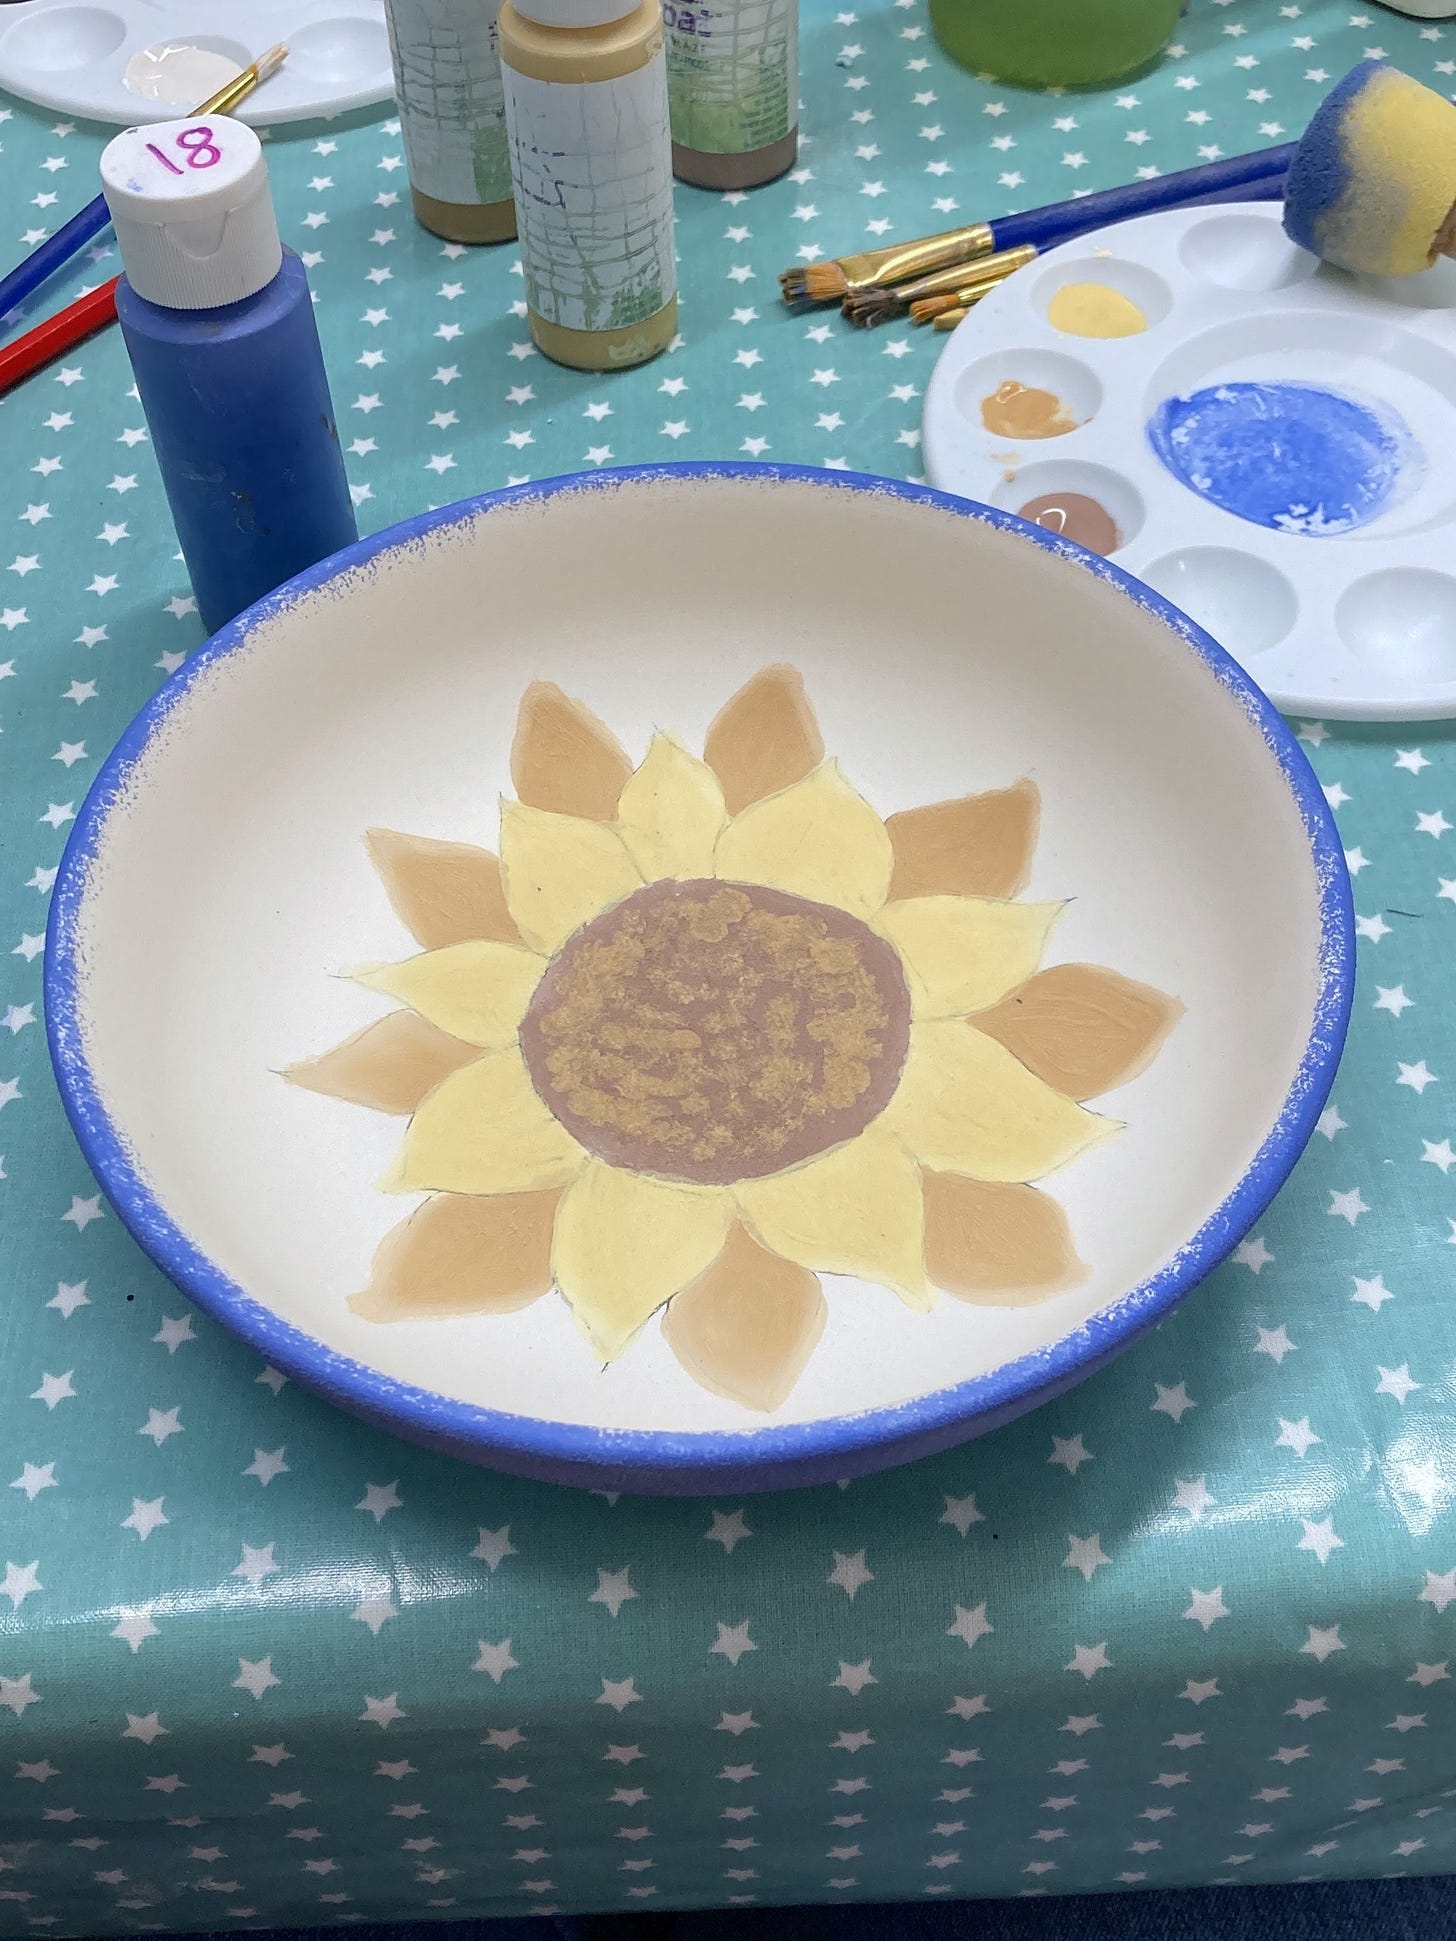 Pottery painting table. In the centre of the image is a white bowl with a sunflower painted inside and a sponged royal blue rim and outside.